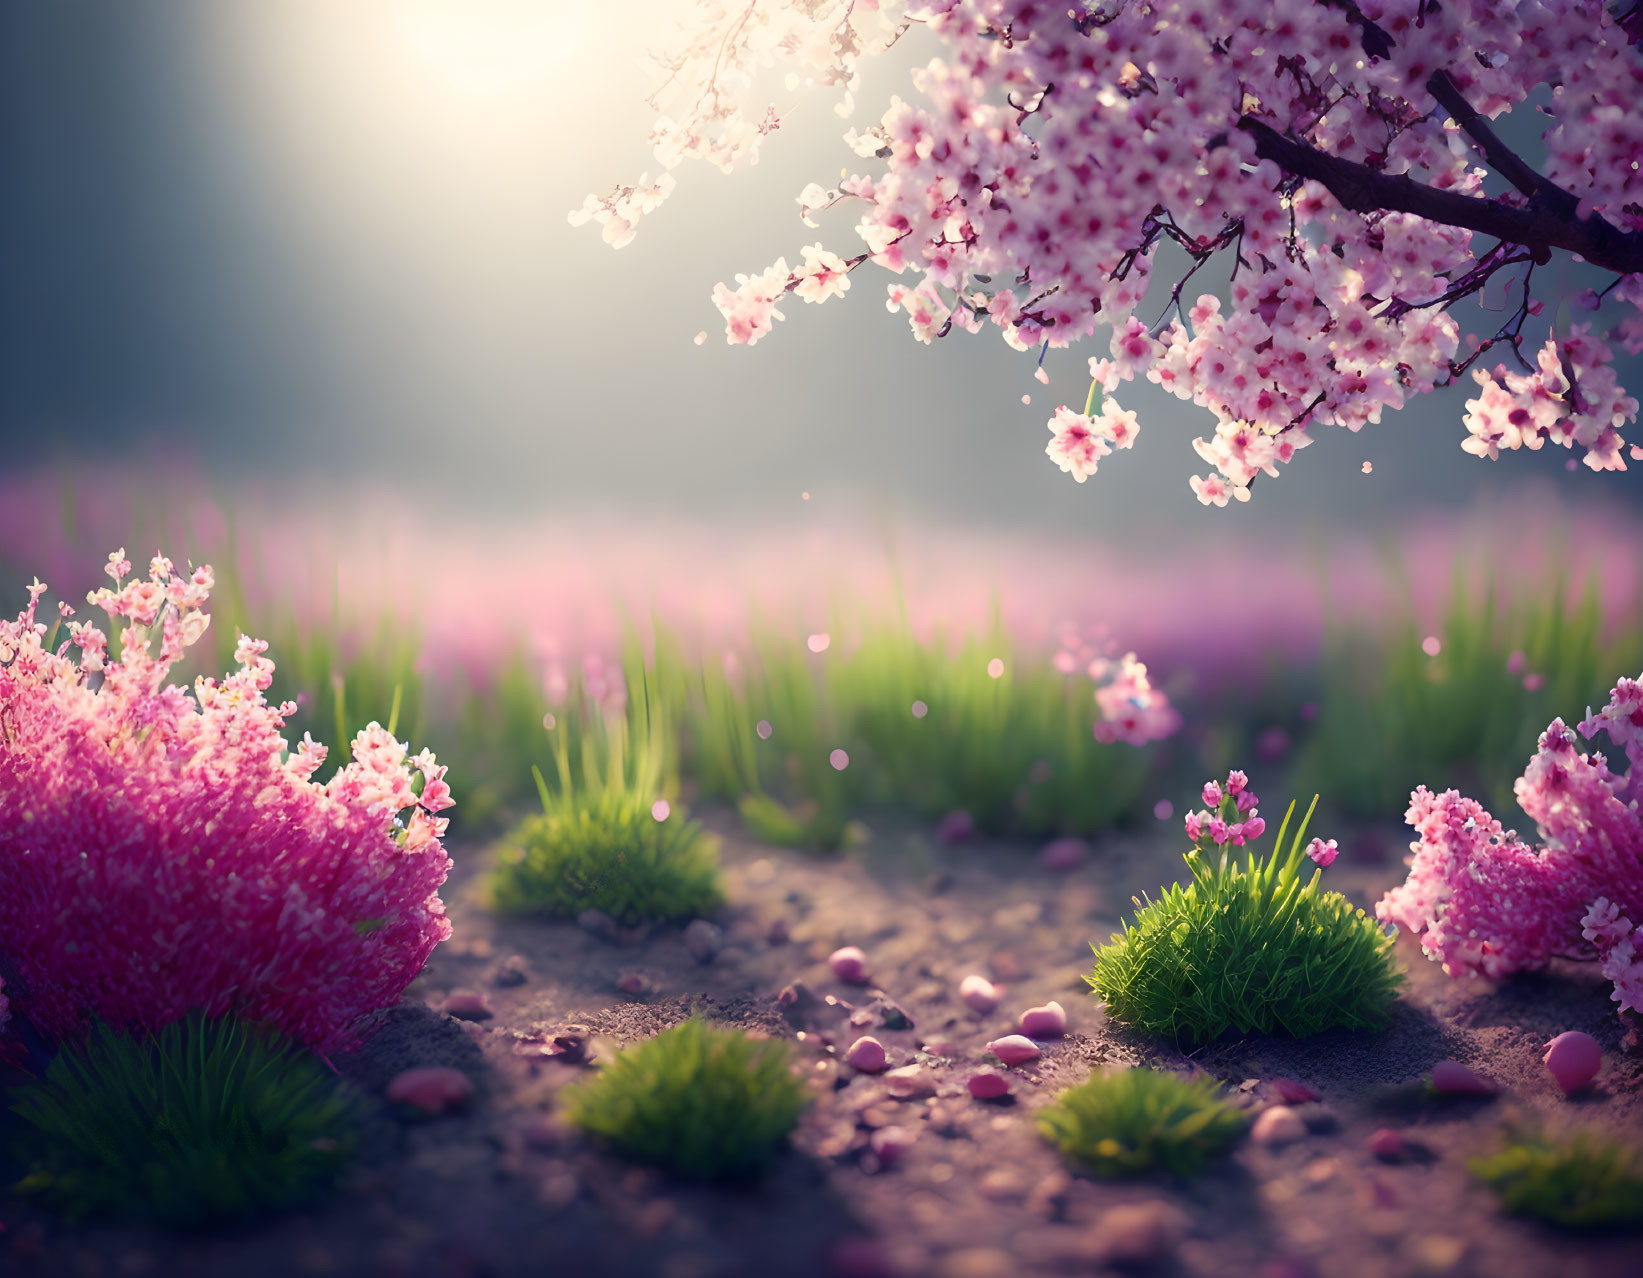 Pink cherry blossom branch in dreamy meadow with glowing sunlight and floating petals